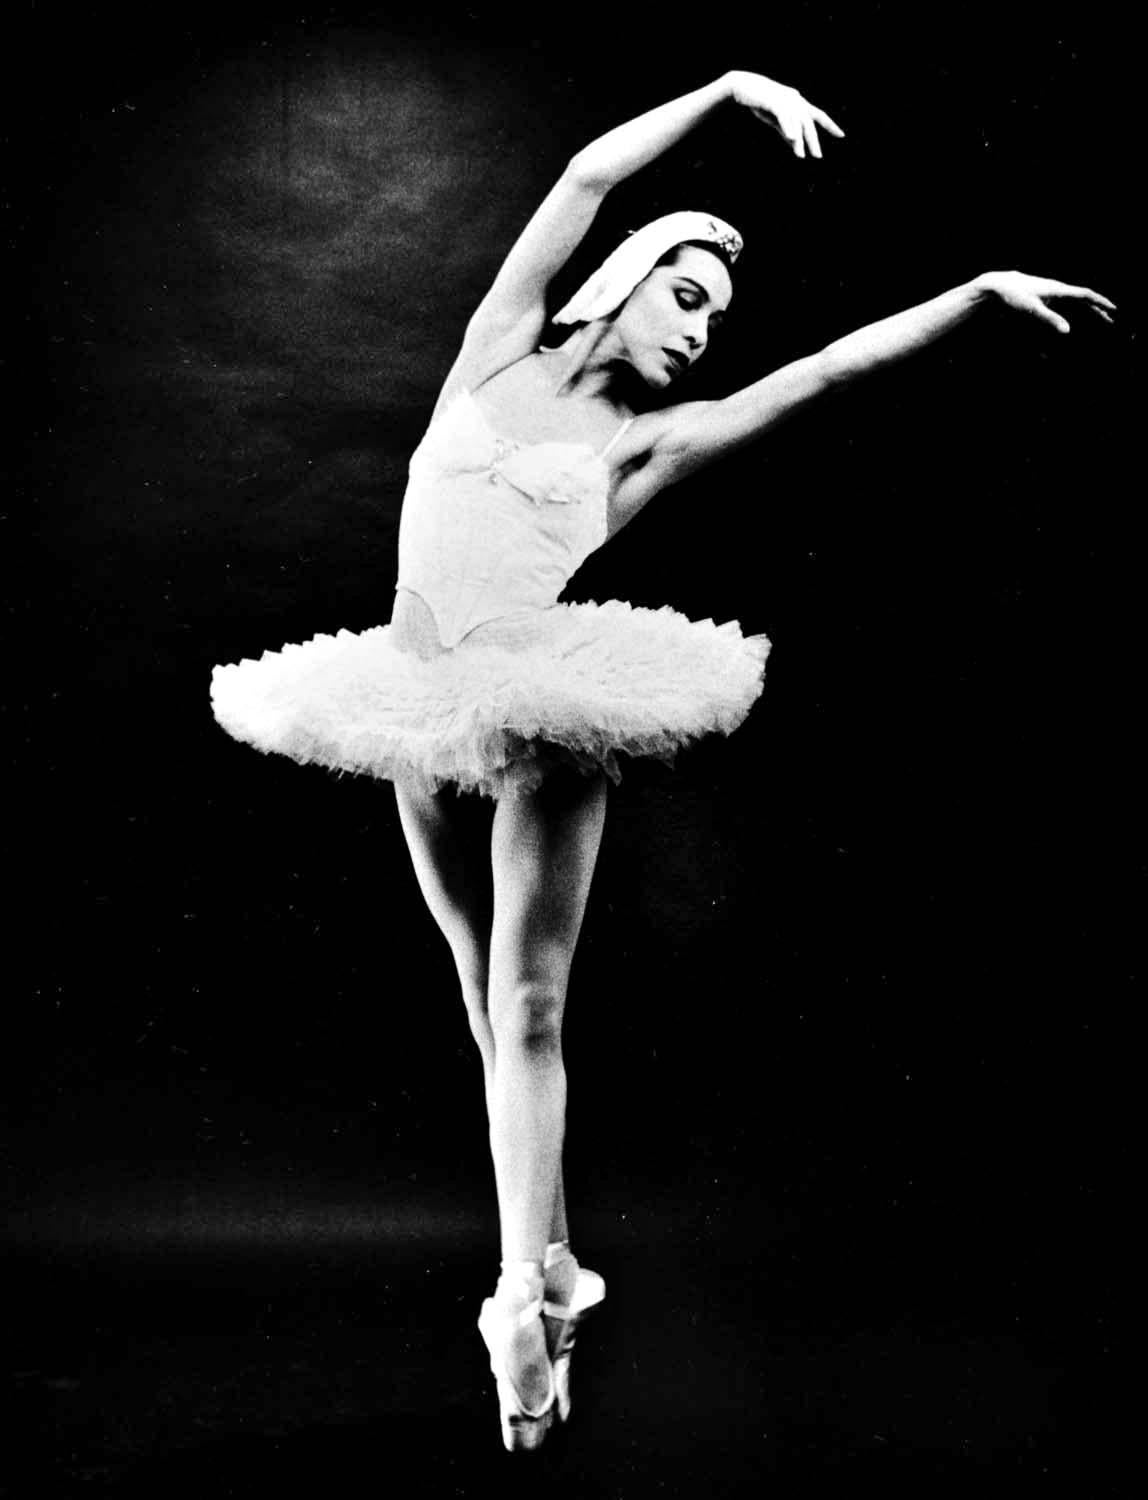 Jack Mitchell Black and White Photograph - Native American Prima Ballerina Maria Tallchief in "Swan Lake" signed by Jack